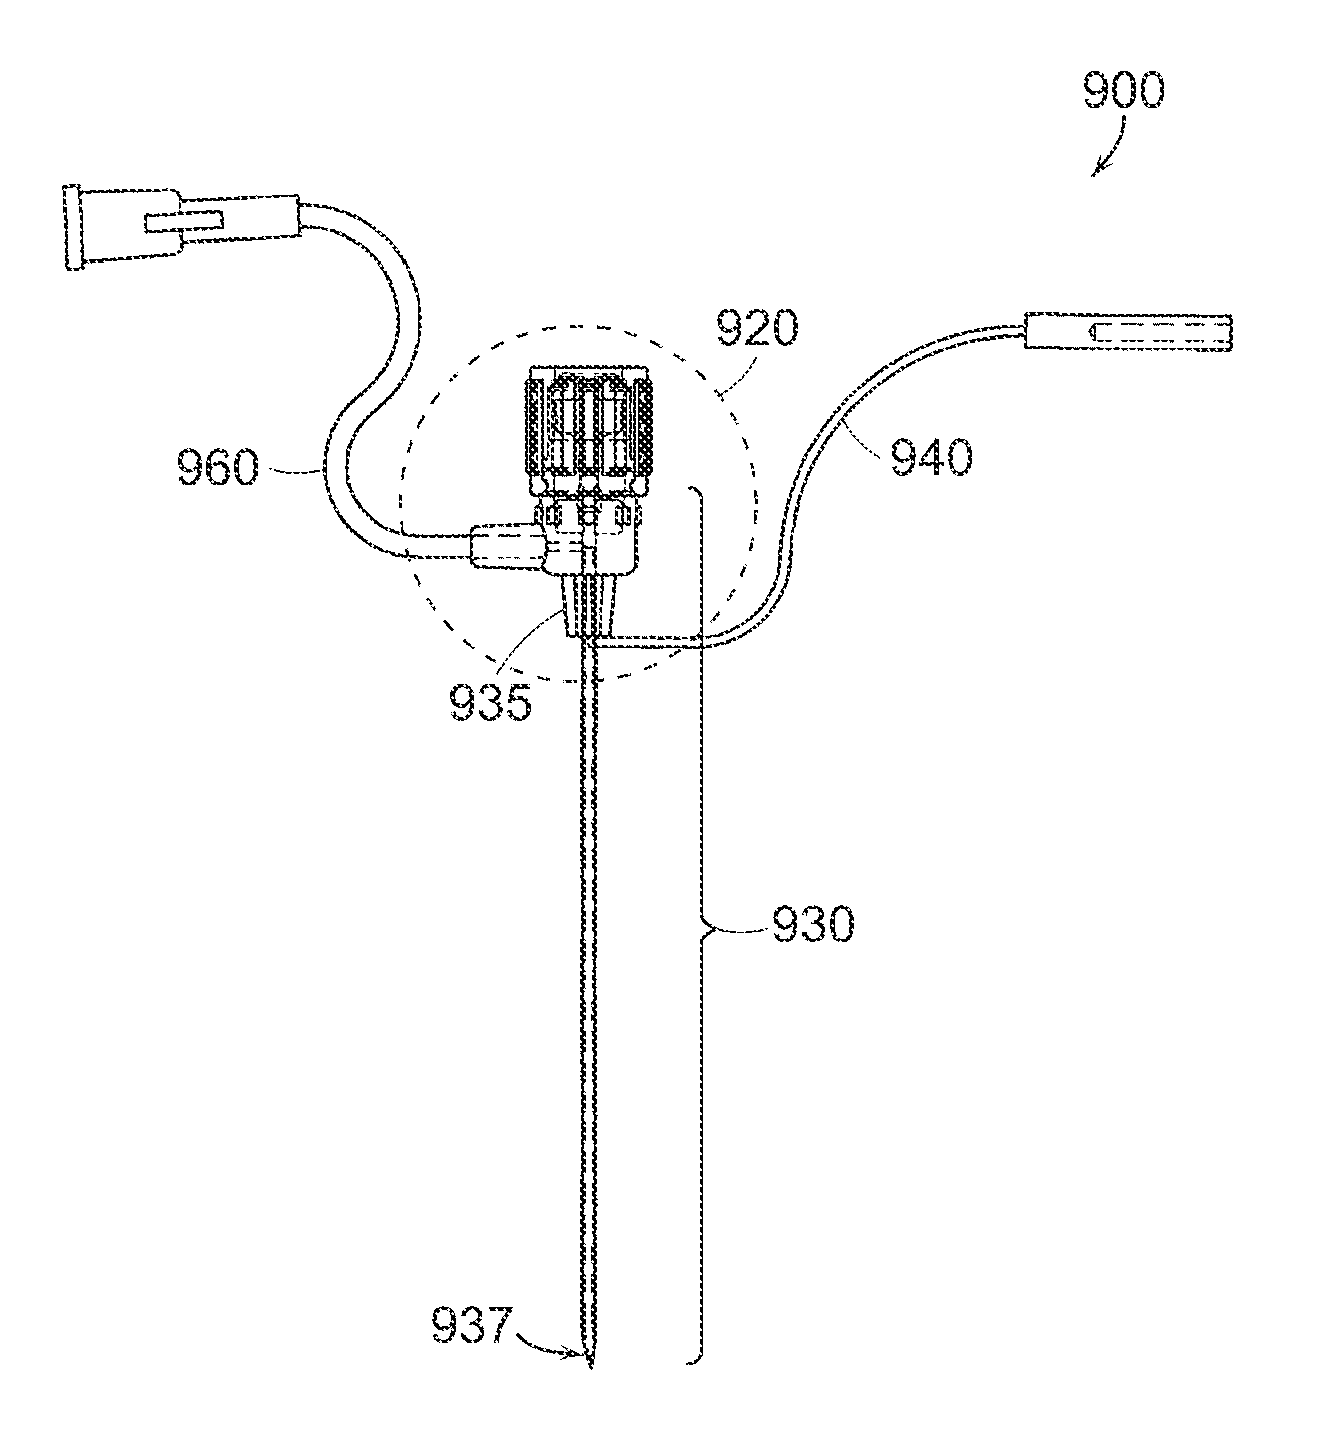 Catheter system and method for administering regional anesthesia to a patient